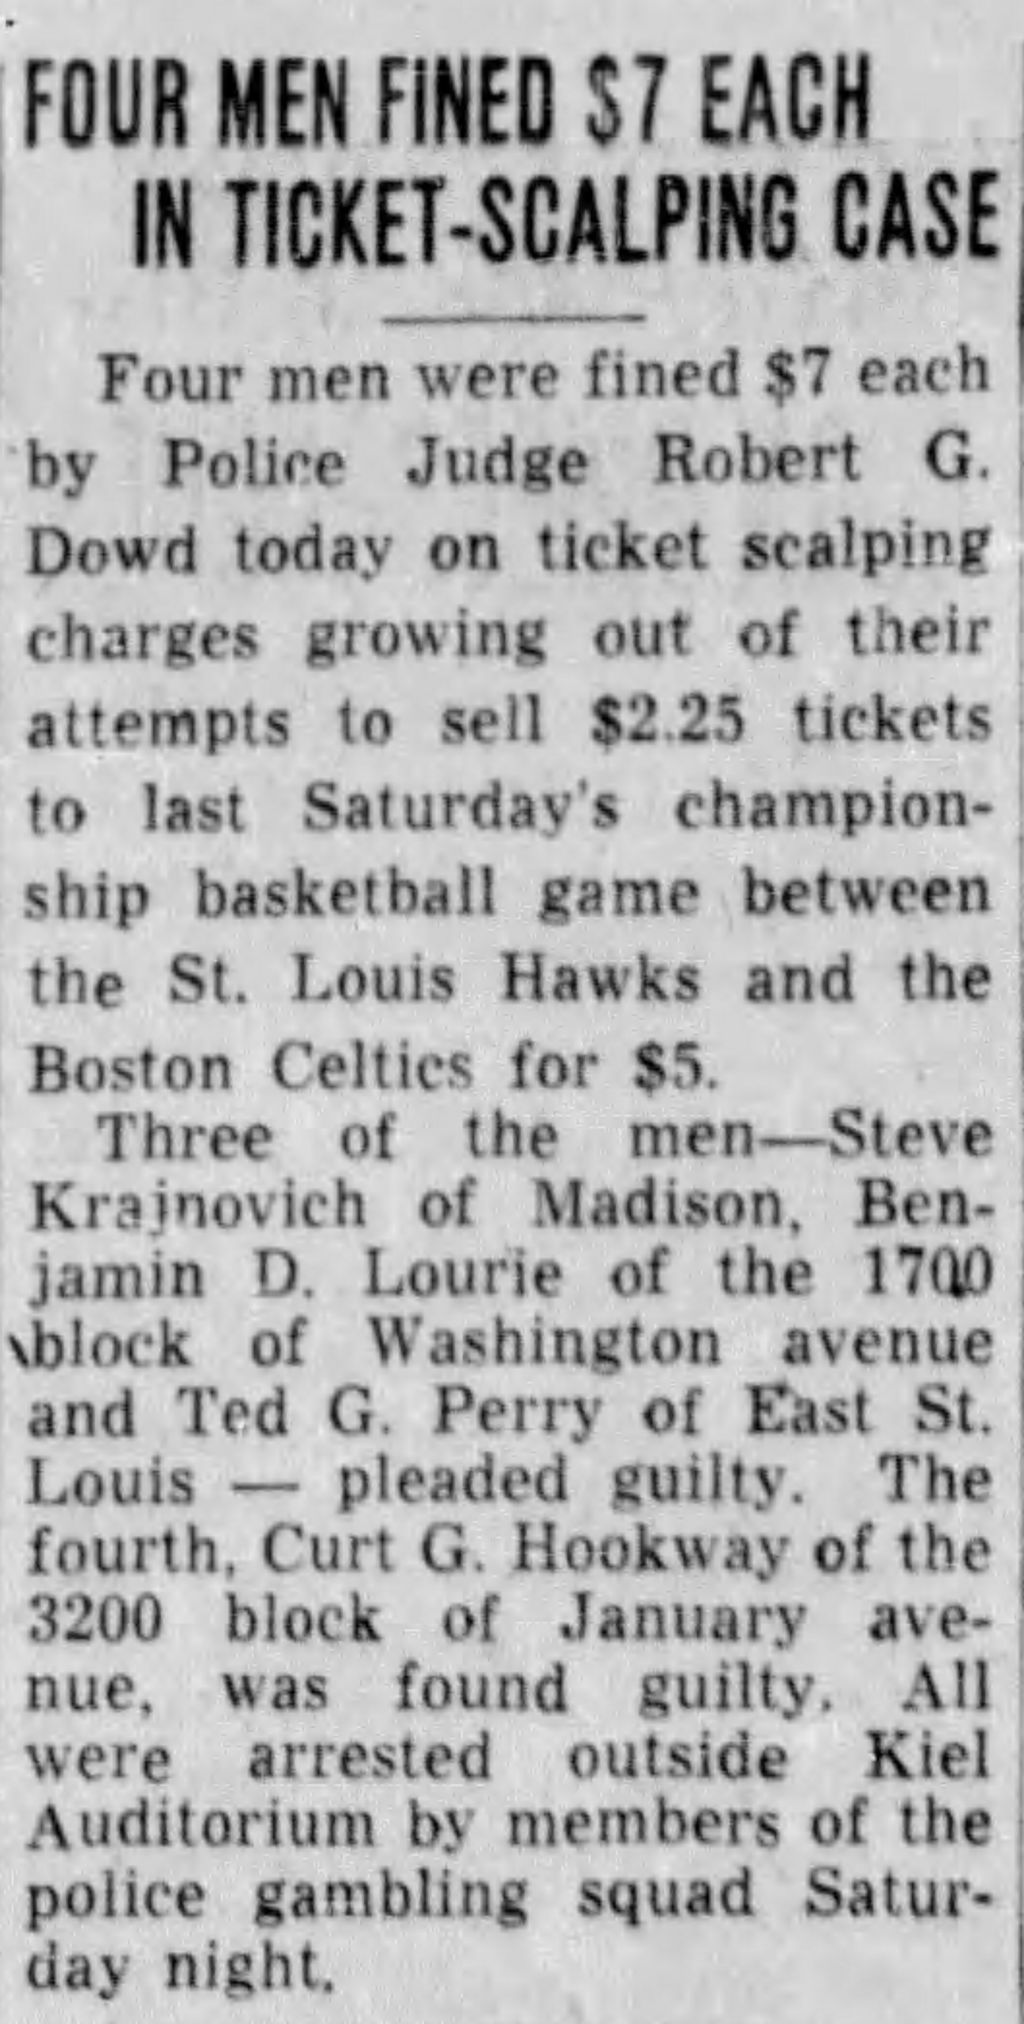 On This Day In Sports: April 12, 1958: Bob Pettit Leads The Hawks To The  Top Of The Mountain